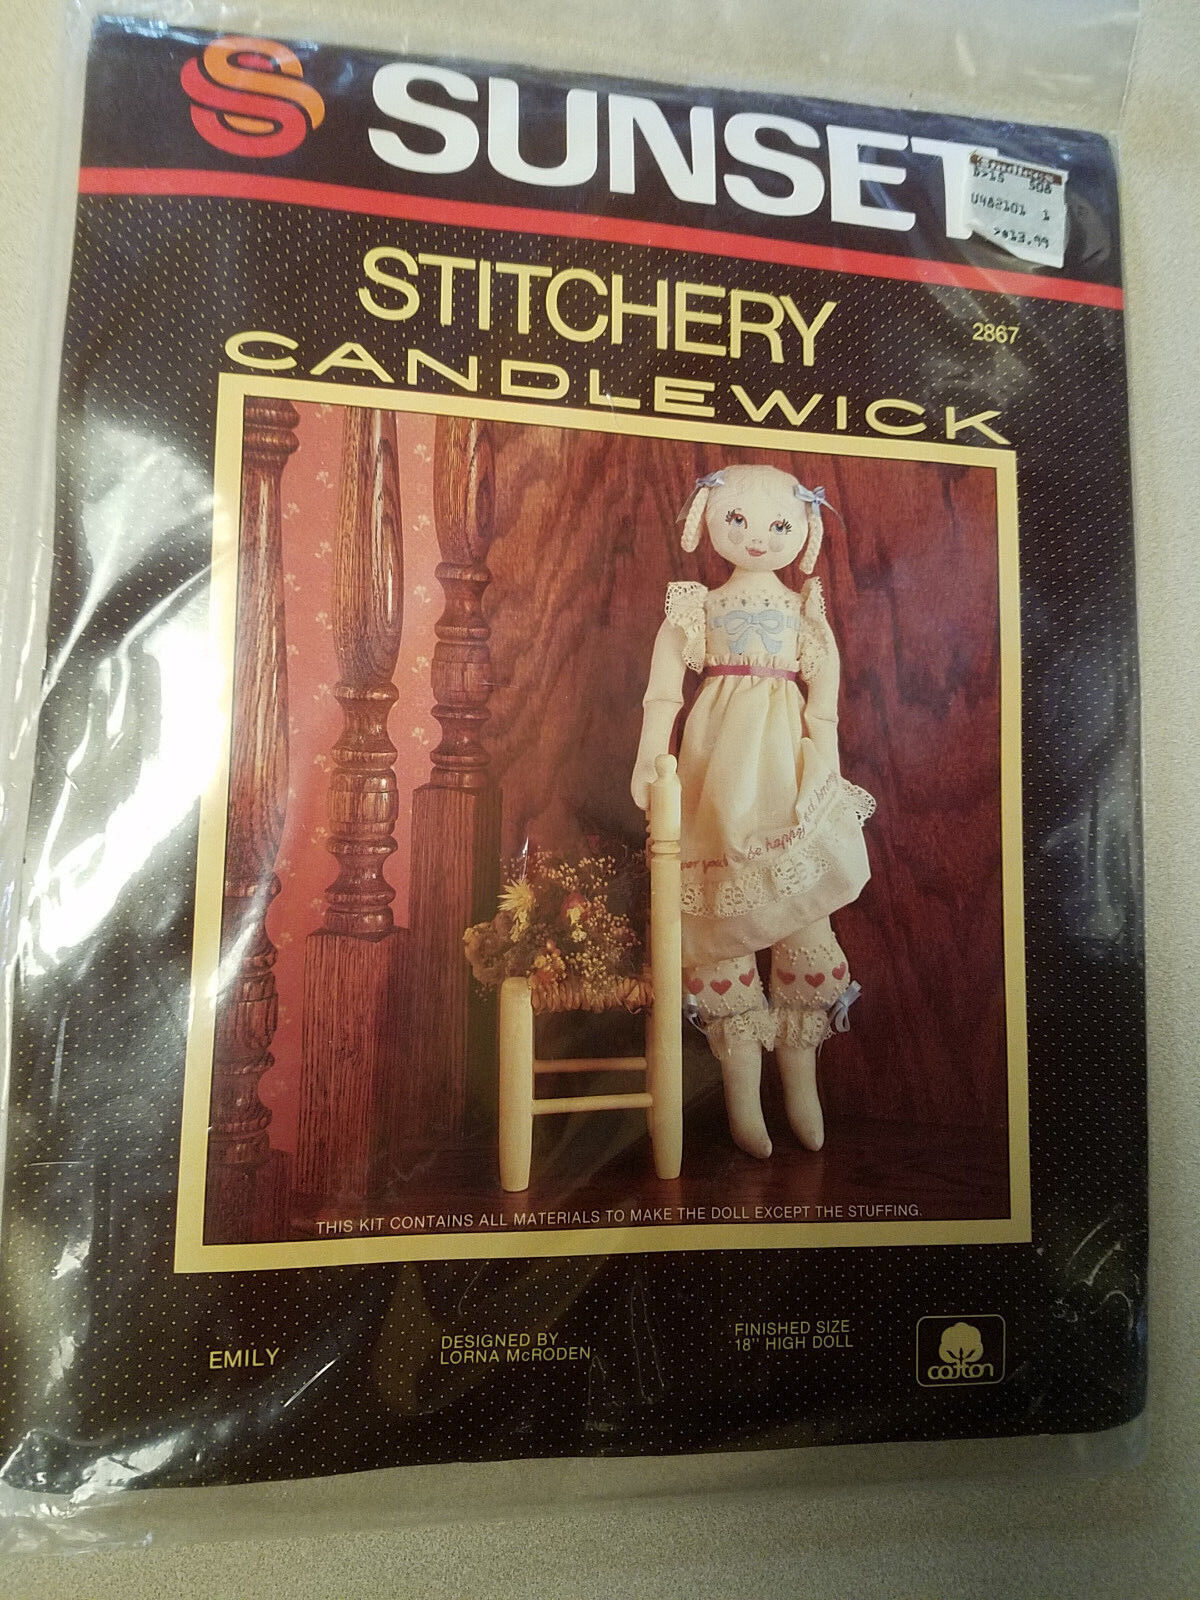 Primary image for Sunset Stitchery Candlewick #2867 Emily 18" High Doll Lorna McRoden (NEW)